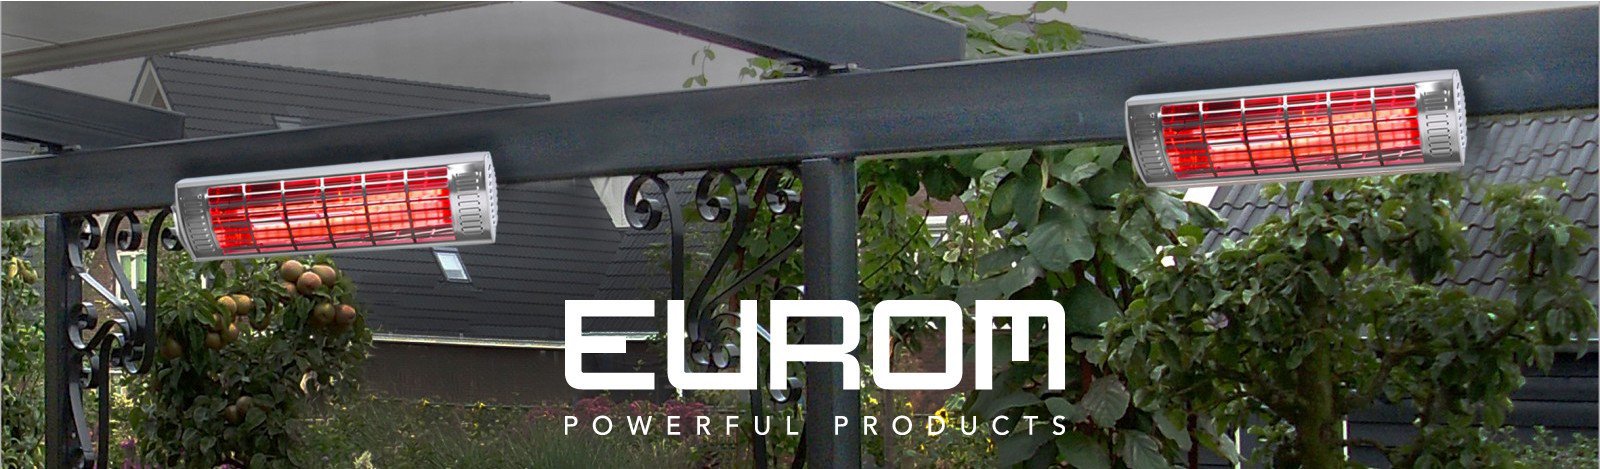 pk Wederzijds Modernisering Eurom patio heaters | View the full assortment here at Firepit-online.com